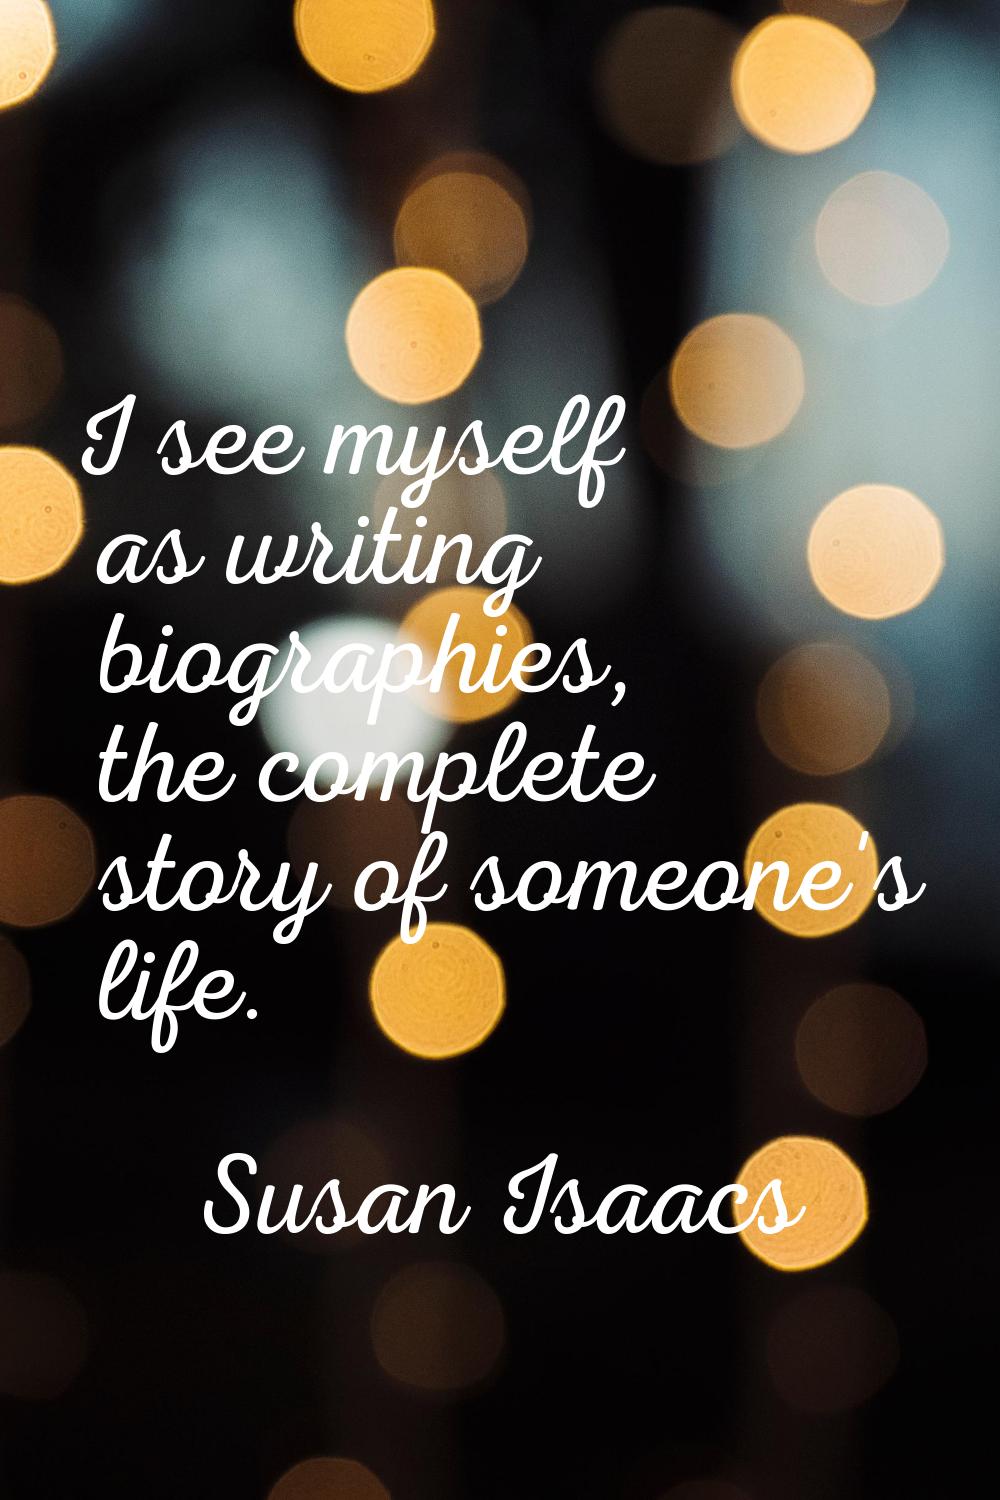 I see myself as writing biographies, the complete story of someone's life.